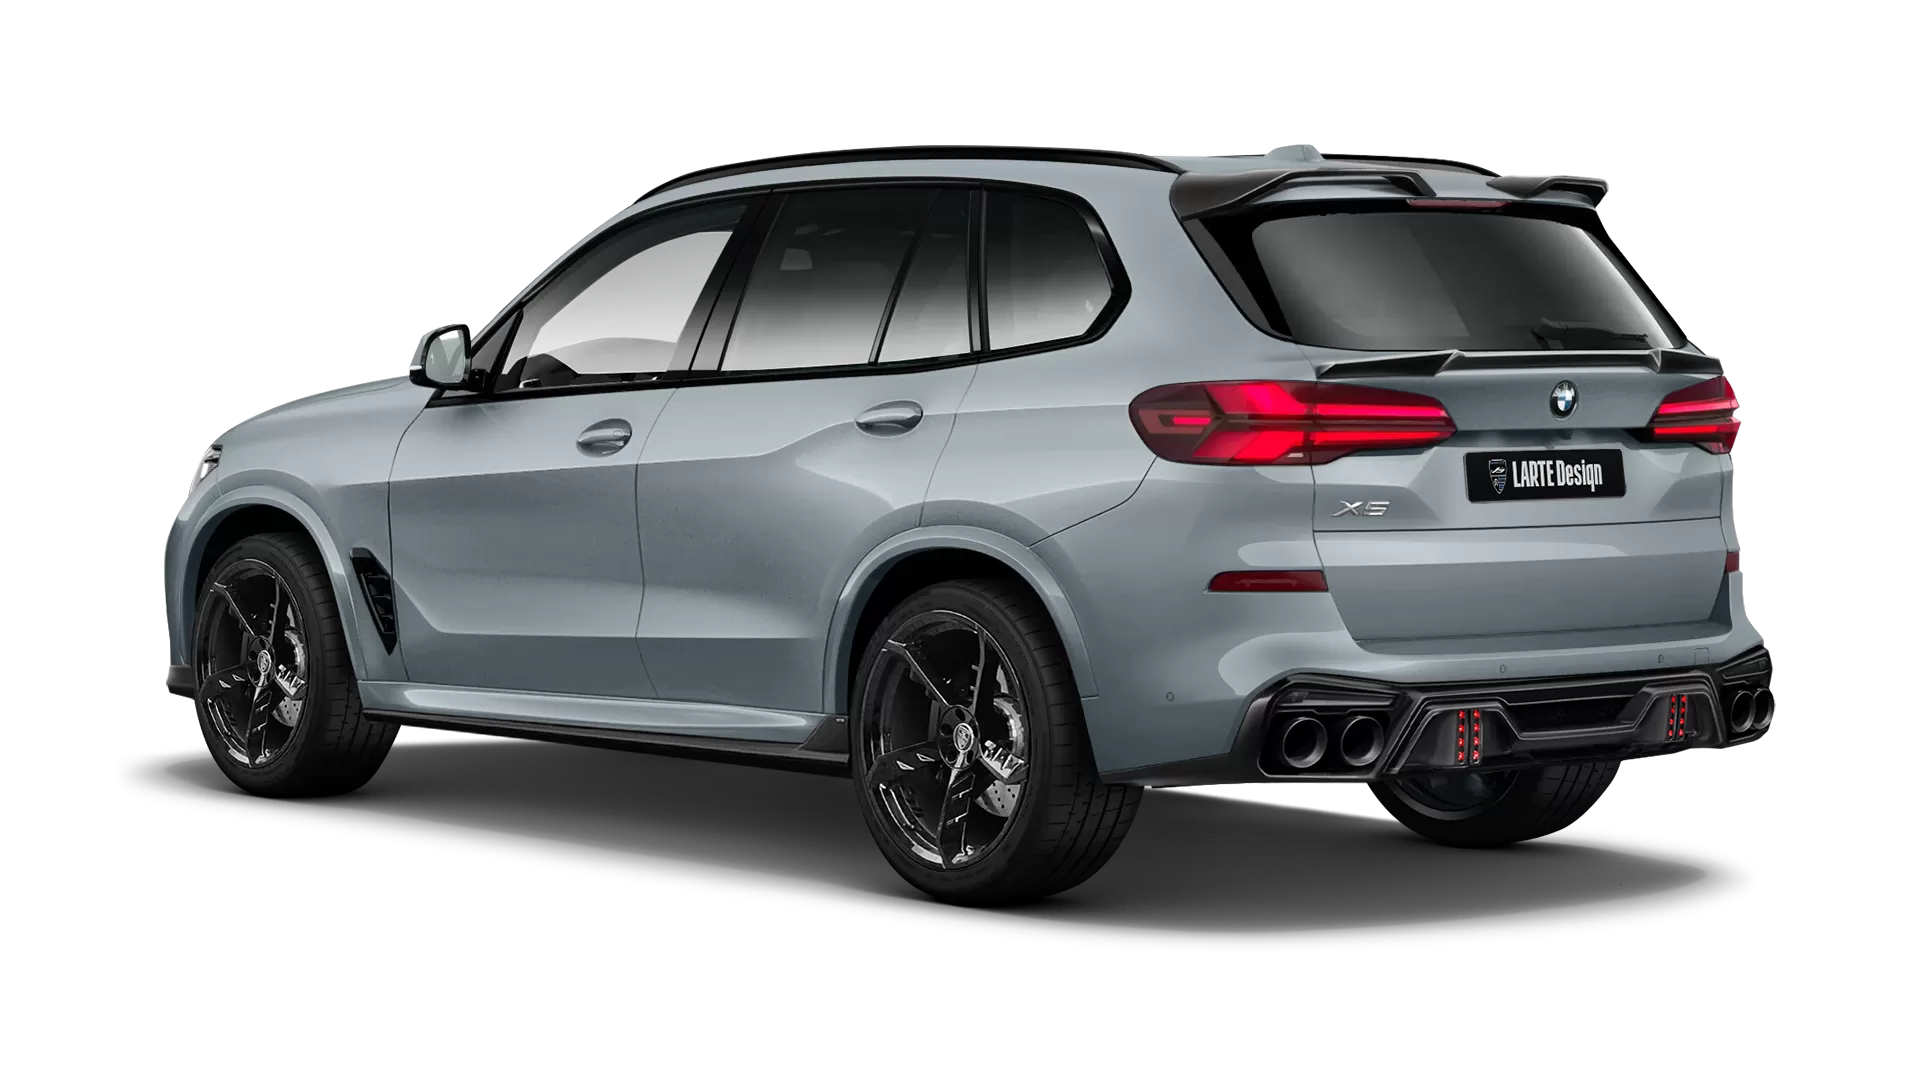 BMW X5 G05 LCI Facelift with painted body kit: rear view shown in Frozen Pure Grey